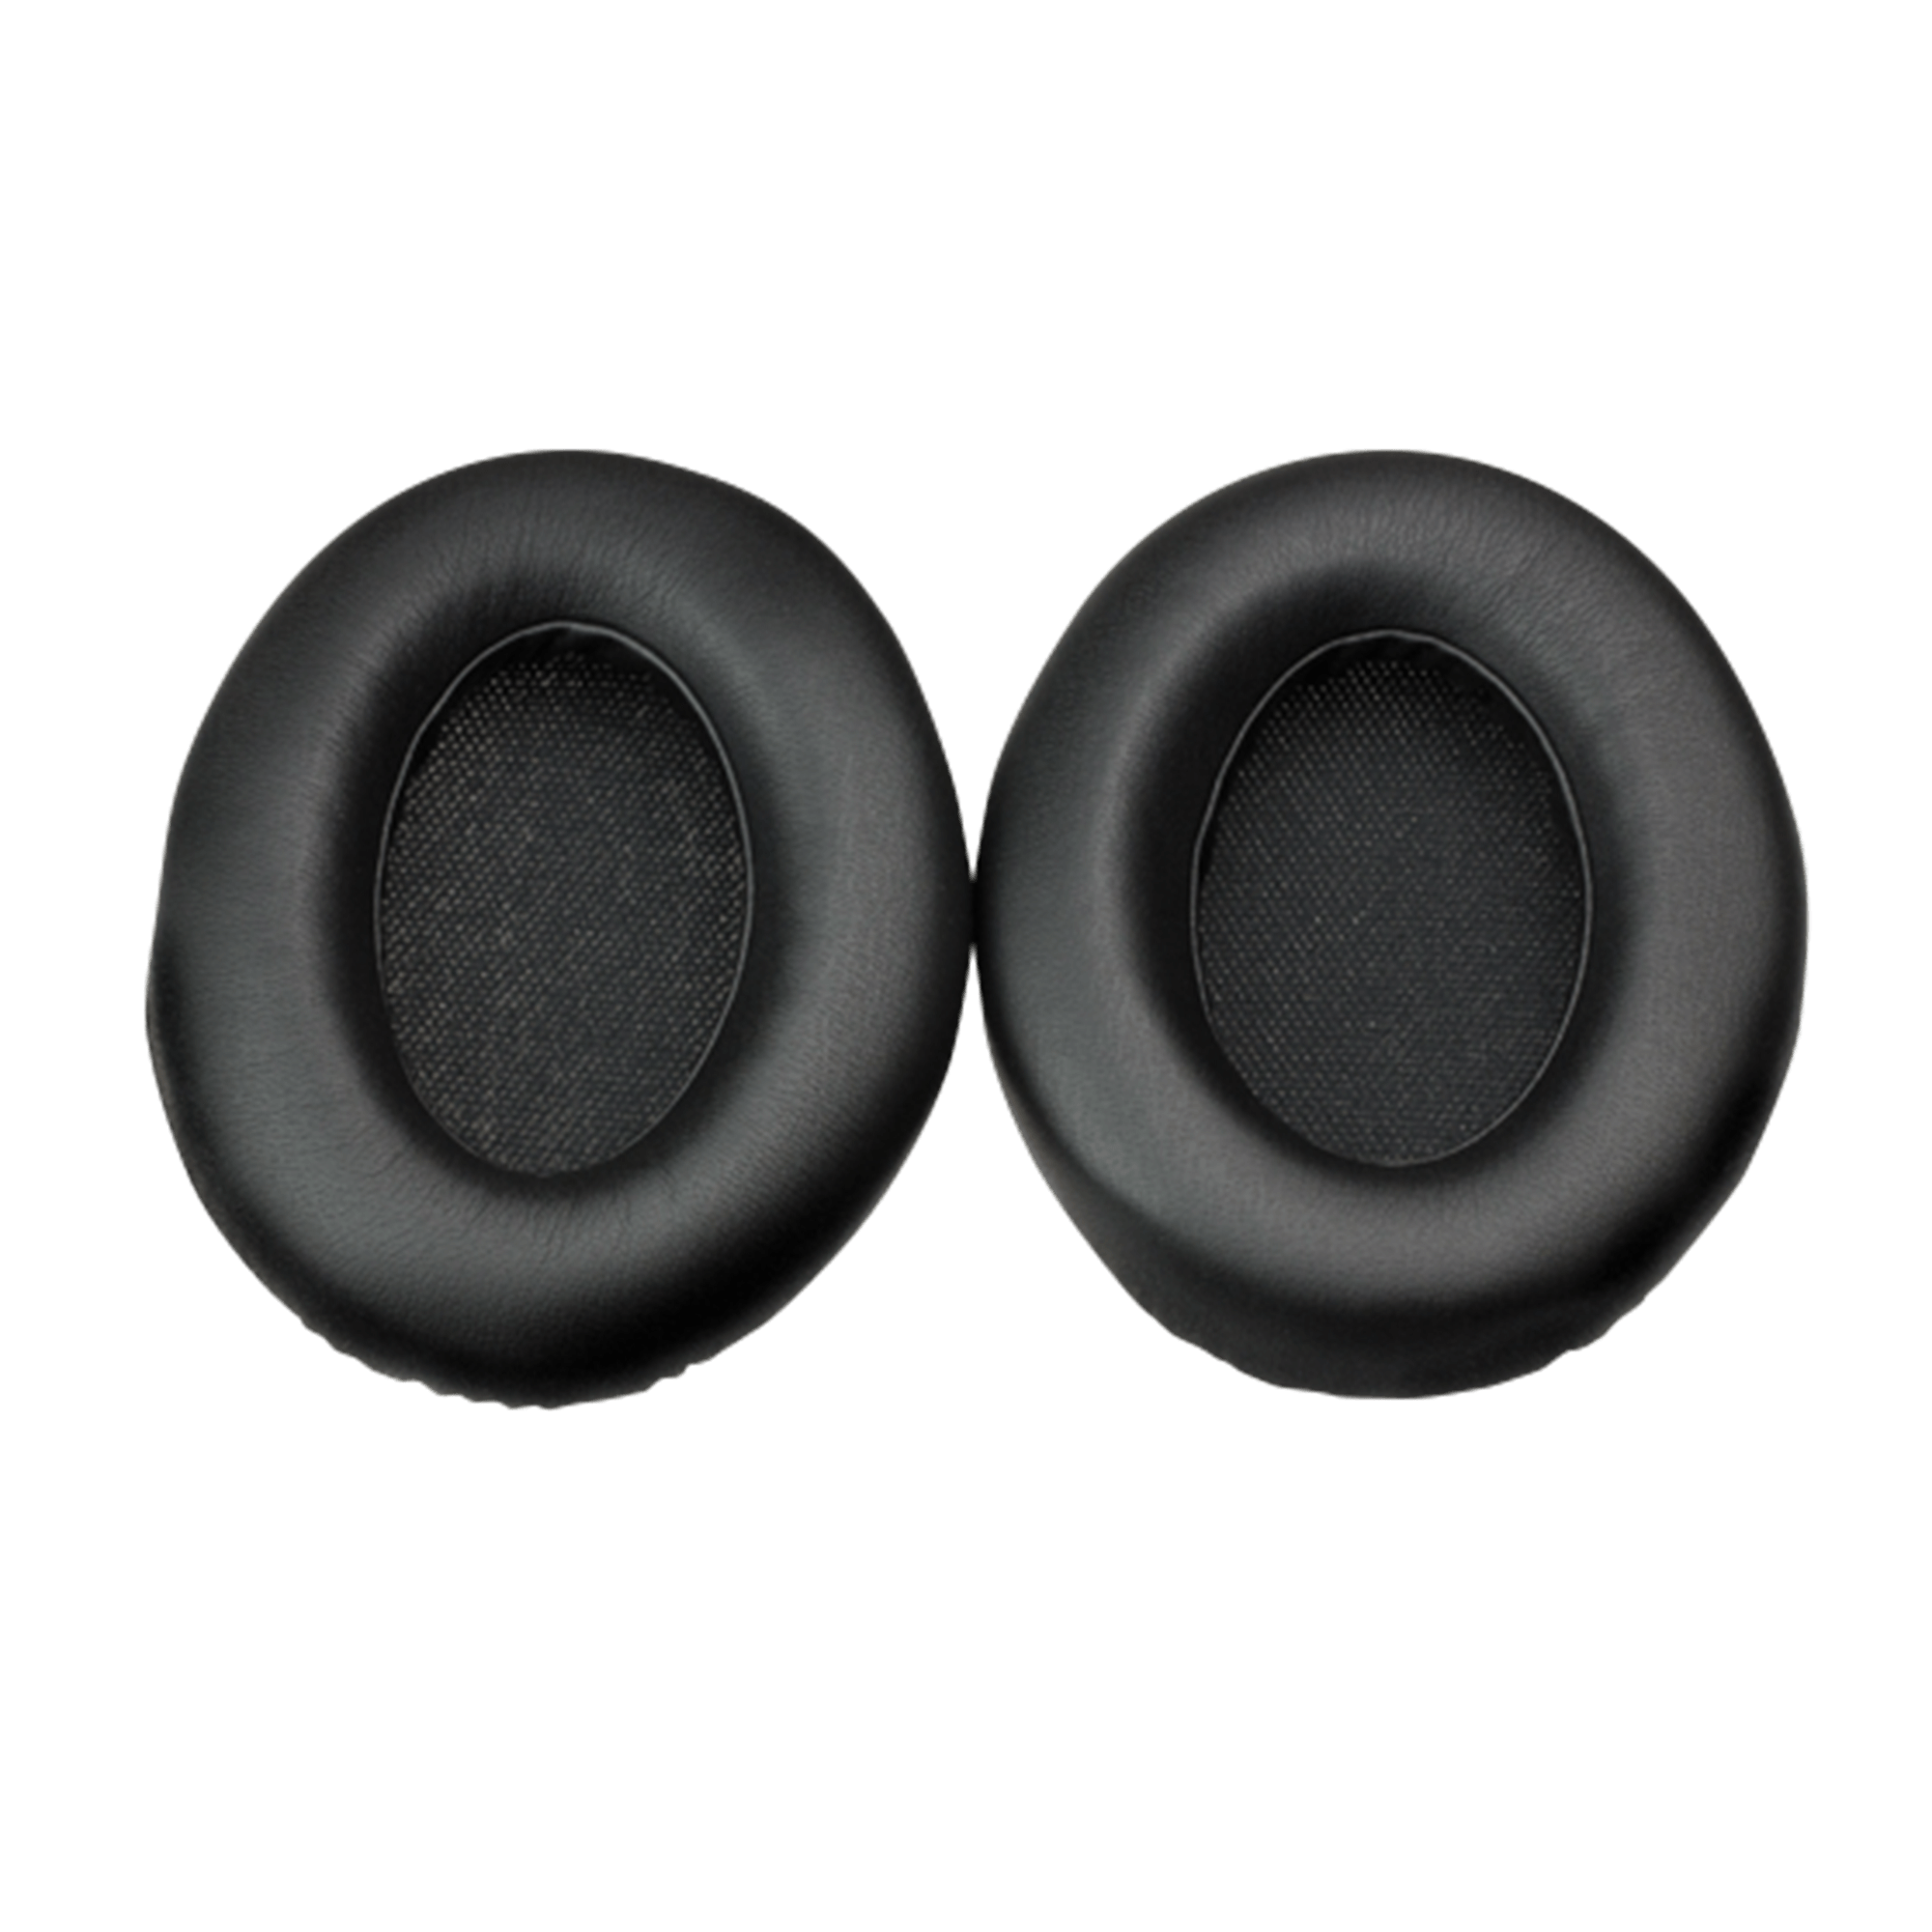 Replacement headphone pads